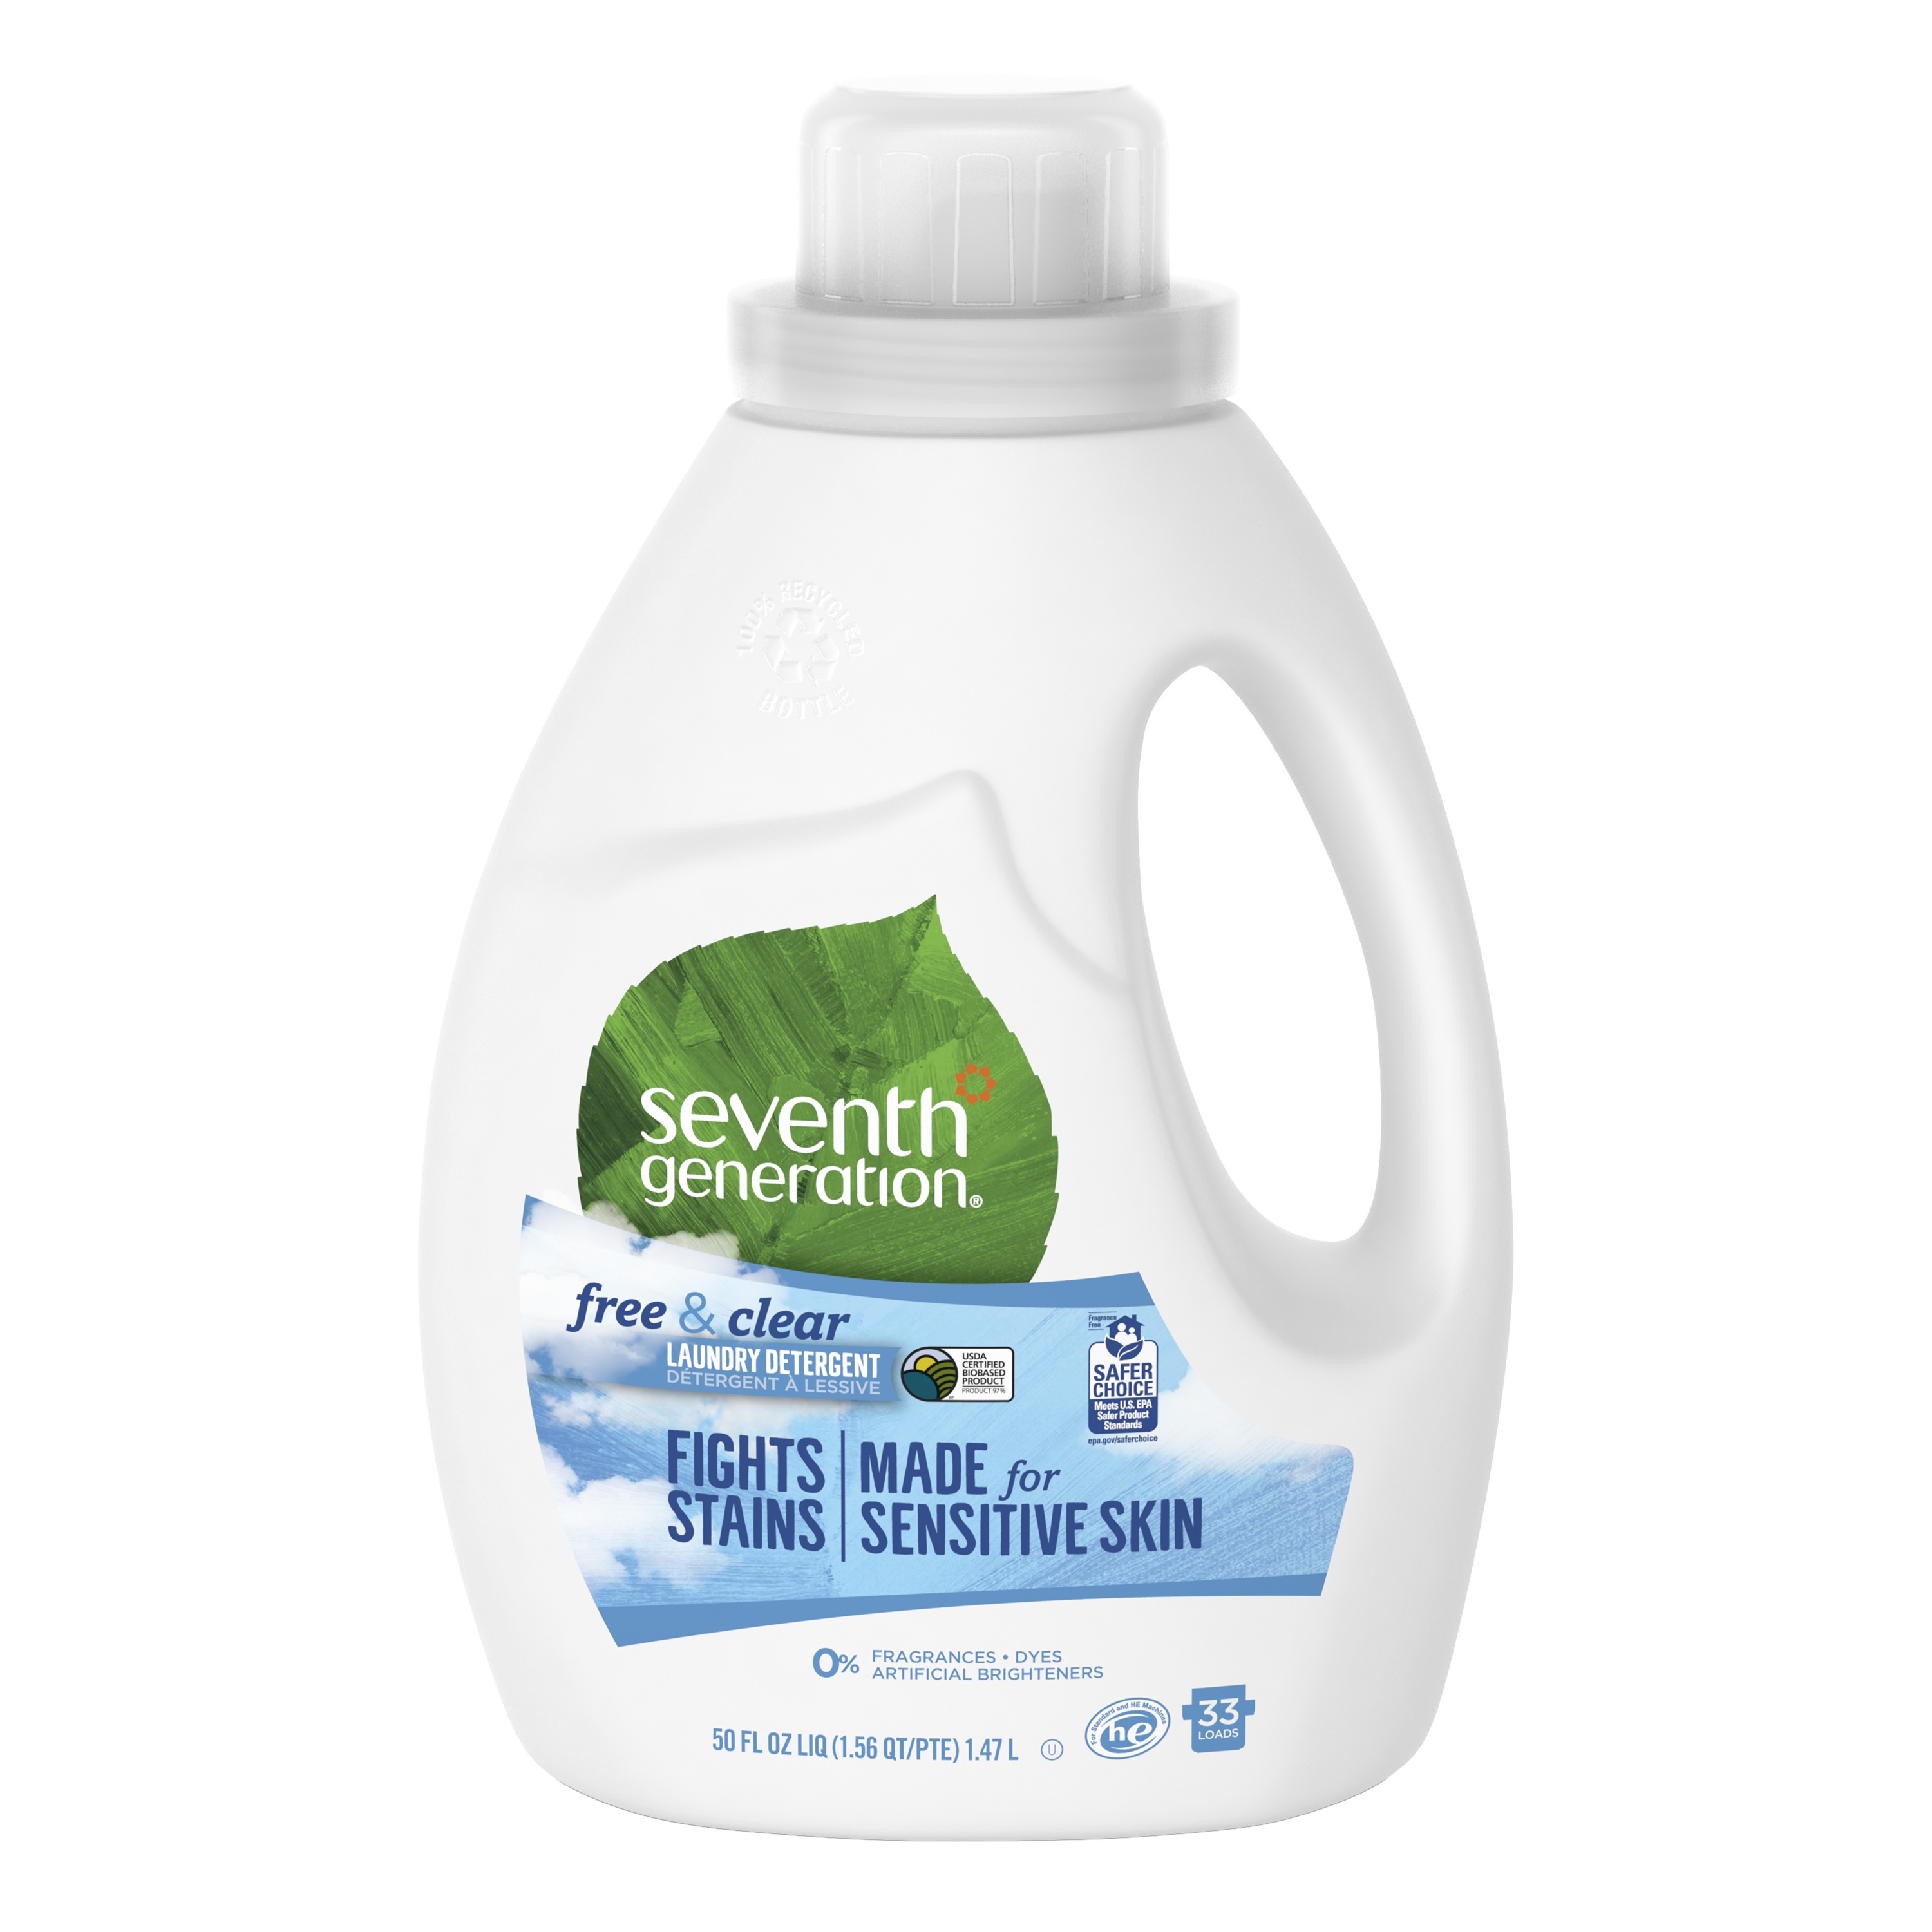 Natural 2X Concentrate Liquid Laundry Detergent, Free&Clear, 33 loads,50oz,6/Ctn